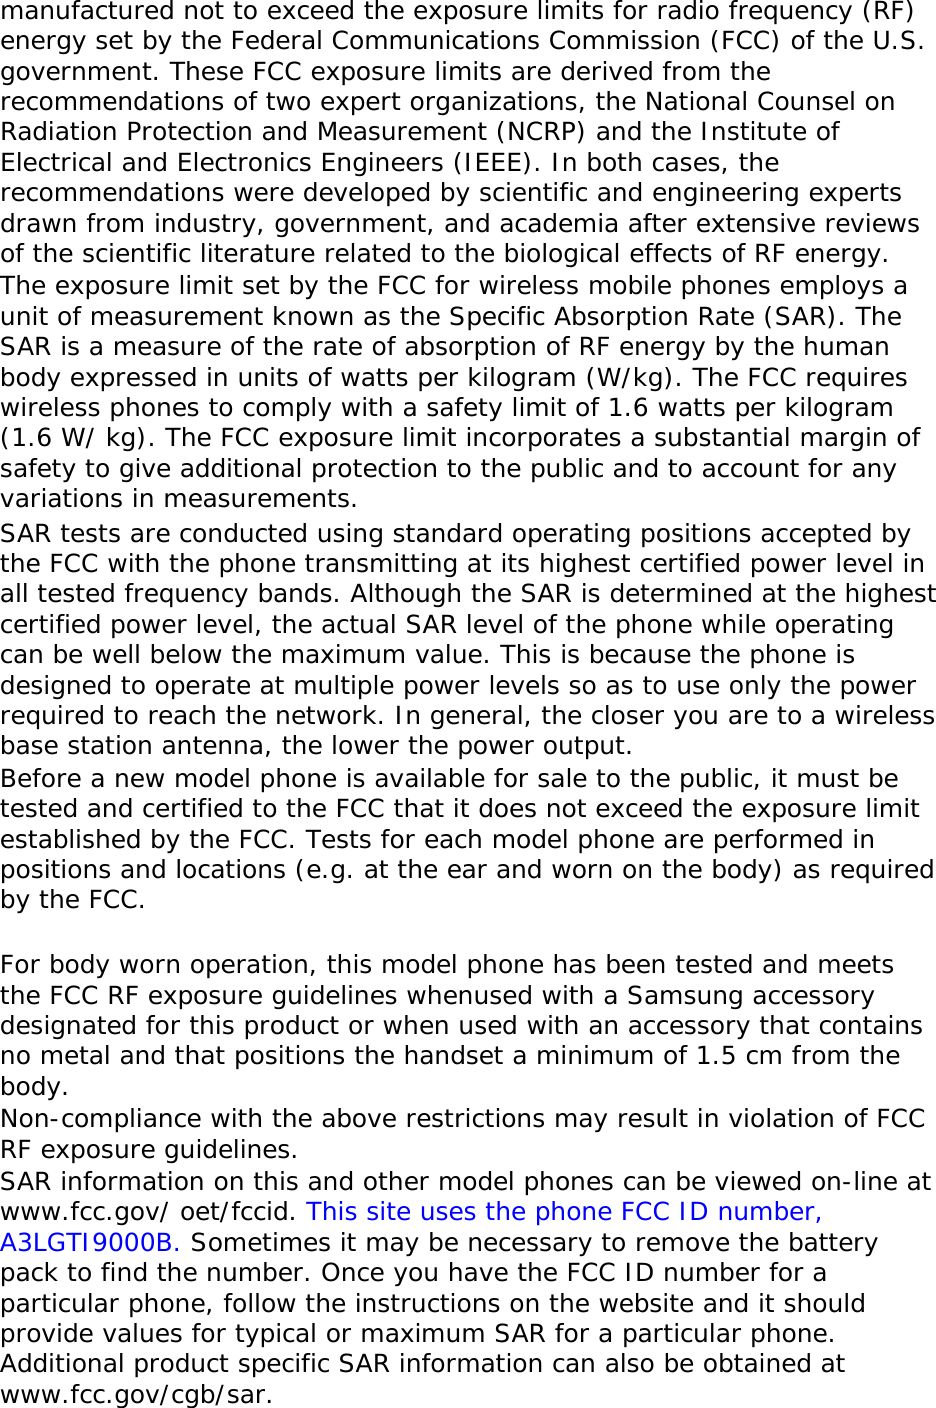 manufactured not to exceed the exposure limits for radio frequency (RF) energy set by the Federal Communications Commission (FCC) of the U.S. government. These FCC exposure limits are derived from the recommendations of two expert organizations, the National Counsel on Radiation Protection and Measurement (NCRP) and the Institute of Electrical and Electronics Engineers (IEEE). In both cases, the recommendations were developed by scientific and engineering experts drawn from industry, government, and academia after extensive reviews of the scientific literature related to the biological effects of RF energy. The exposure limit set by the FCC for wireless mobile phones employs a unit of measurement known as the Specific Absorption Rate (SAR). The SAR is a measure of the rate of absorption of RF energy by the human body expressed in units of watts per kilogram (W/kg). The FCC requires wireless phones to comply with a safety limit of 1.6 watts per kilogram (1.6 W/ kg). The FCC exposure limit incorporates a substantial margin of safety to give additional protection to the public and to account for any variations in measurements. SAR tests are conducted using standard operating positions accepted by the FCC with the phone transmitting at its highest certified power level in all tested frequency bands. Although the SAR is determined at the highest certified power level, the actual SAR level of the phone while operating can be well below the maximum value. This is because the phone is designed to operate at multiple power levels so as to use only the power required to reach the network. In general, the closer you are to a wireless base station antenna, the lower the power output. Before a new model phone is available for sale to the public, it must be tested and certified to the FCC that it does not exceed the exposure limit established by the FCC. Tests for each model phone are performed in positions and locations (e.g. at the ear and worn on the body) as required by the FCC.    For body worn operation, this model phone has been tested and meets the FCC RF exposure guidelines whenused with a Samsung accessory designated for this product or when used with an accessory that contains no metal and that positions the handset a minimum of 1.5 cm from the body.  Non-compliance with the above restrictions may result in violation of FCC RF exposure guidelines. SAR information on this and other model phones can be viewed on-line at www.fcc.gov/ oet/fccid. This site uses the phone FCC ID number, A3LGTI9000B. Sometimes it may be necessary to remove the battery pack to find the number. Once you have the FCC ID number for a particular phone, follow the instructions on the website and it should provide values for typical or maximum SAR for a particular phone. Additional product specific SAR information can also be obtained at www.fcc.gov/cgb/sar. 